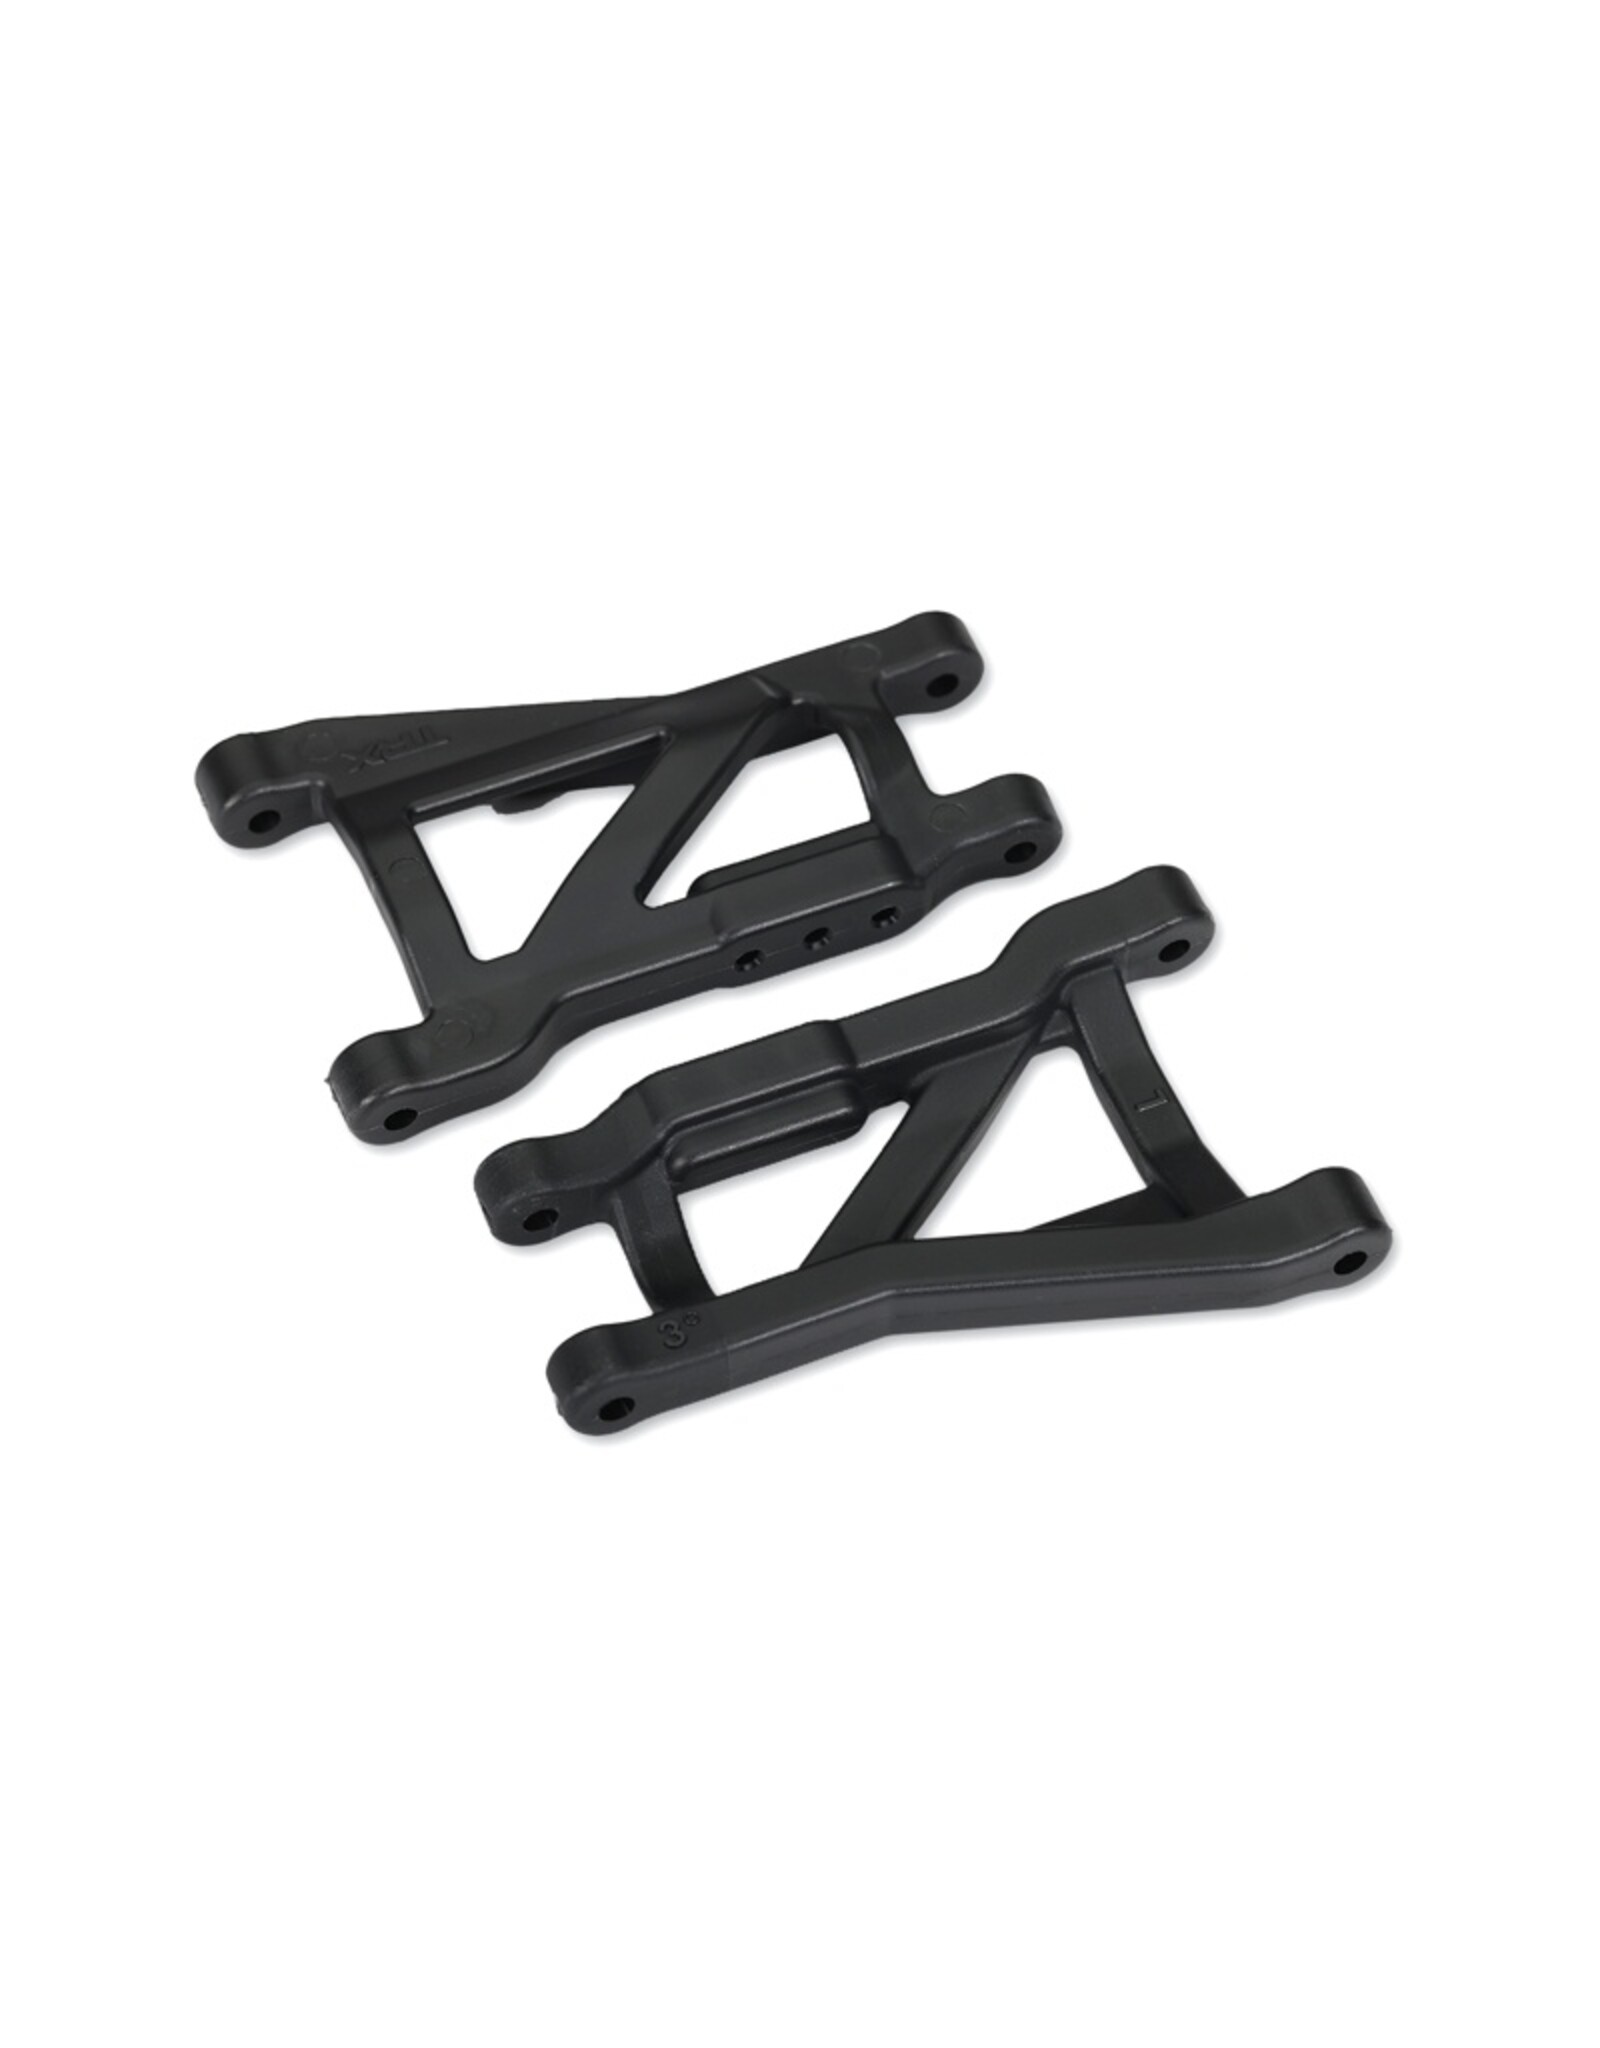 Traxxas TRA2750A Suspension arms, black, rear (left & right), heavy duty (2)